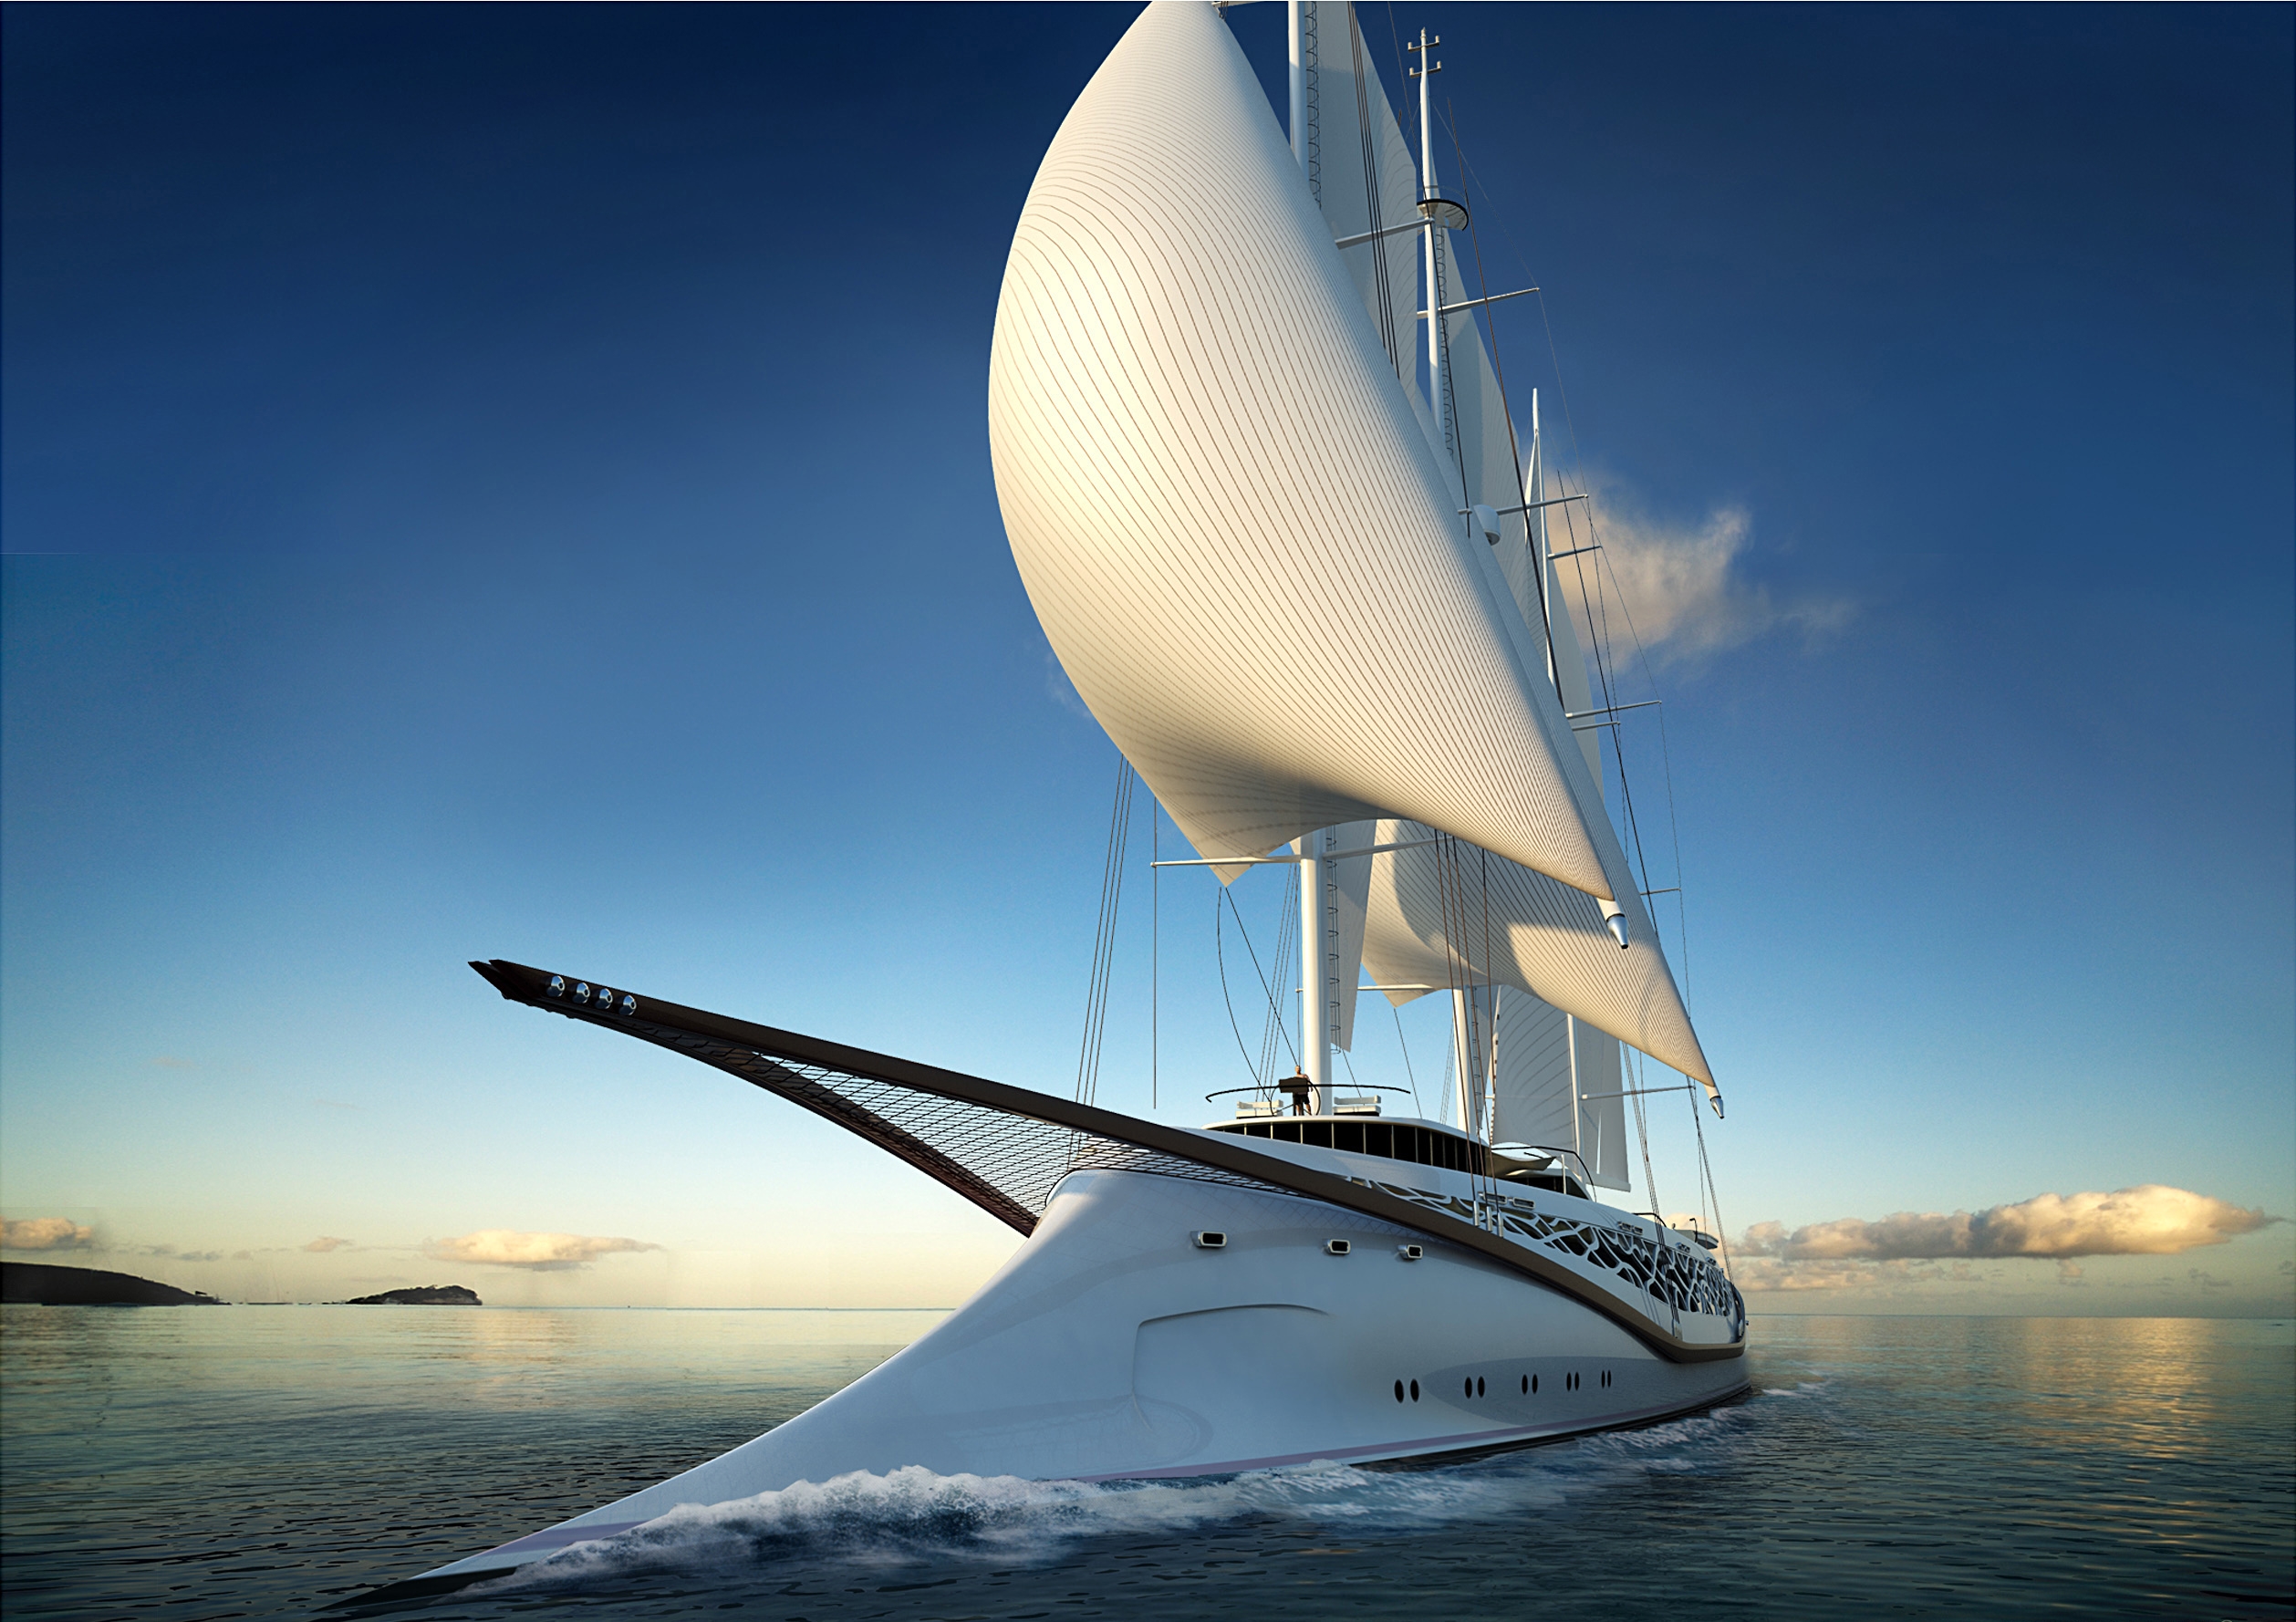 Best Yacht wallpapers for phone screen